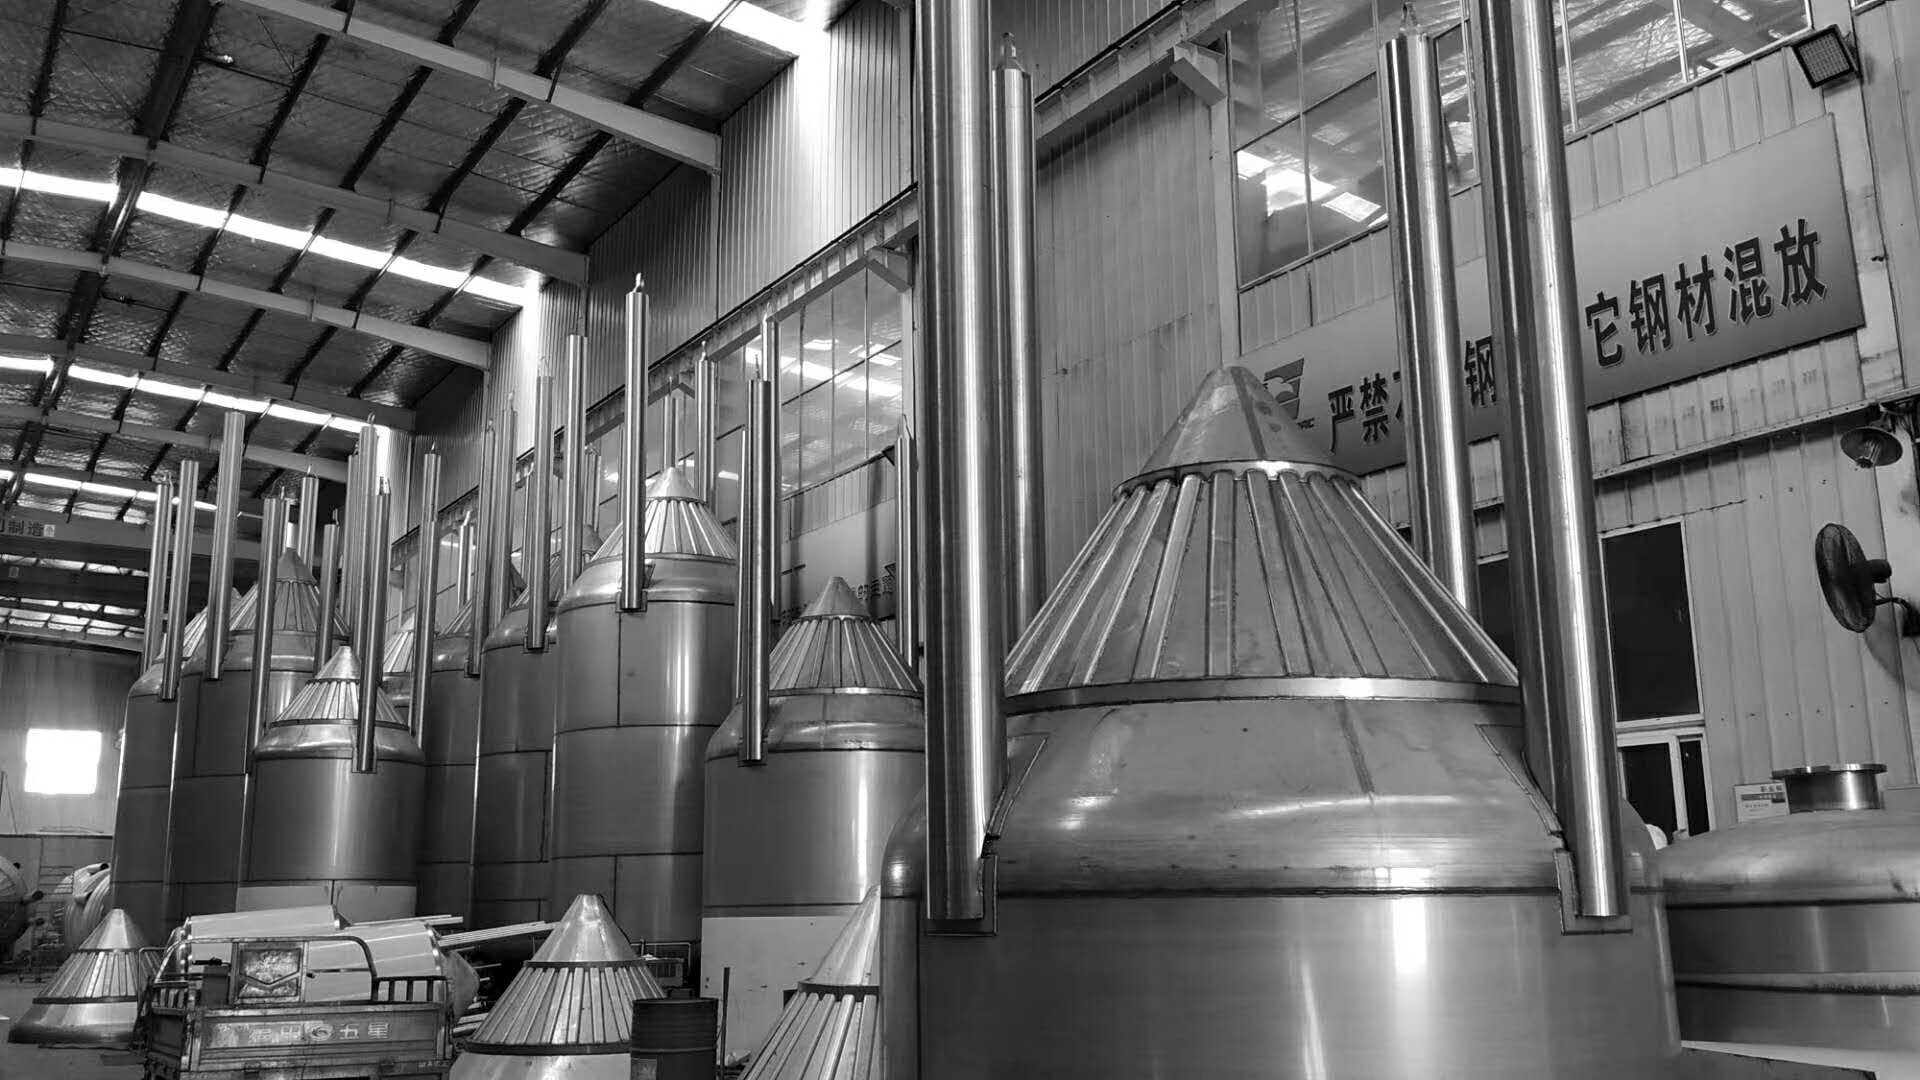  WEMAC Stainless steel concial craft beer fermentation pail tanks hot sell in Norway